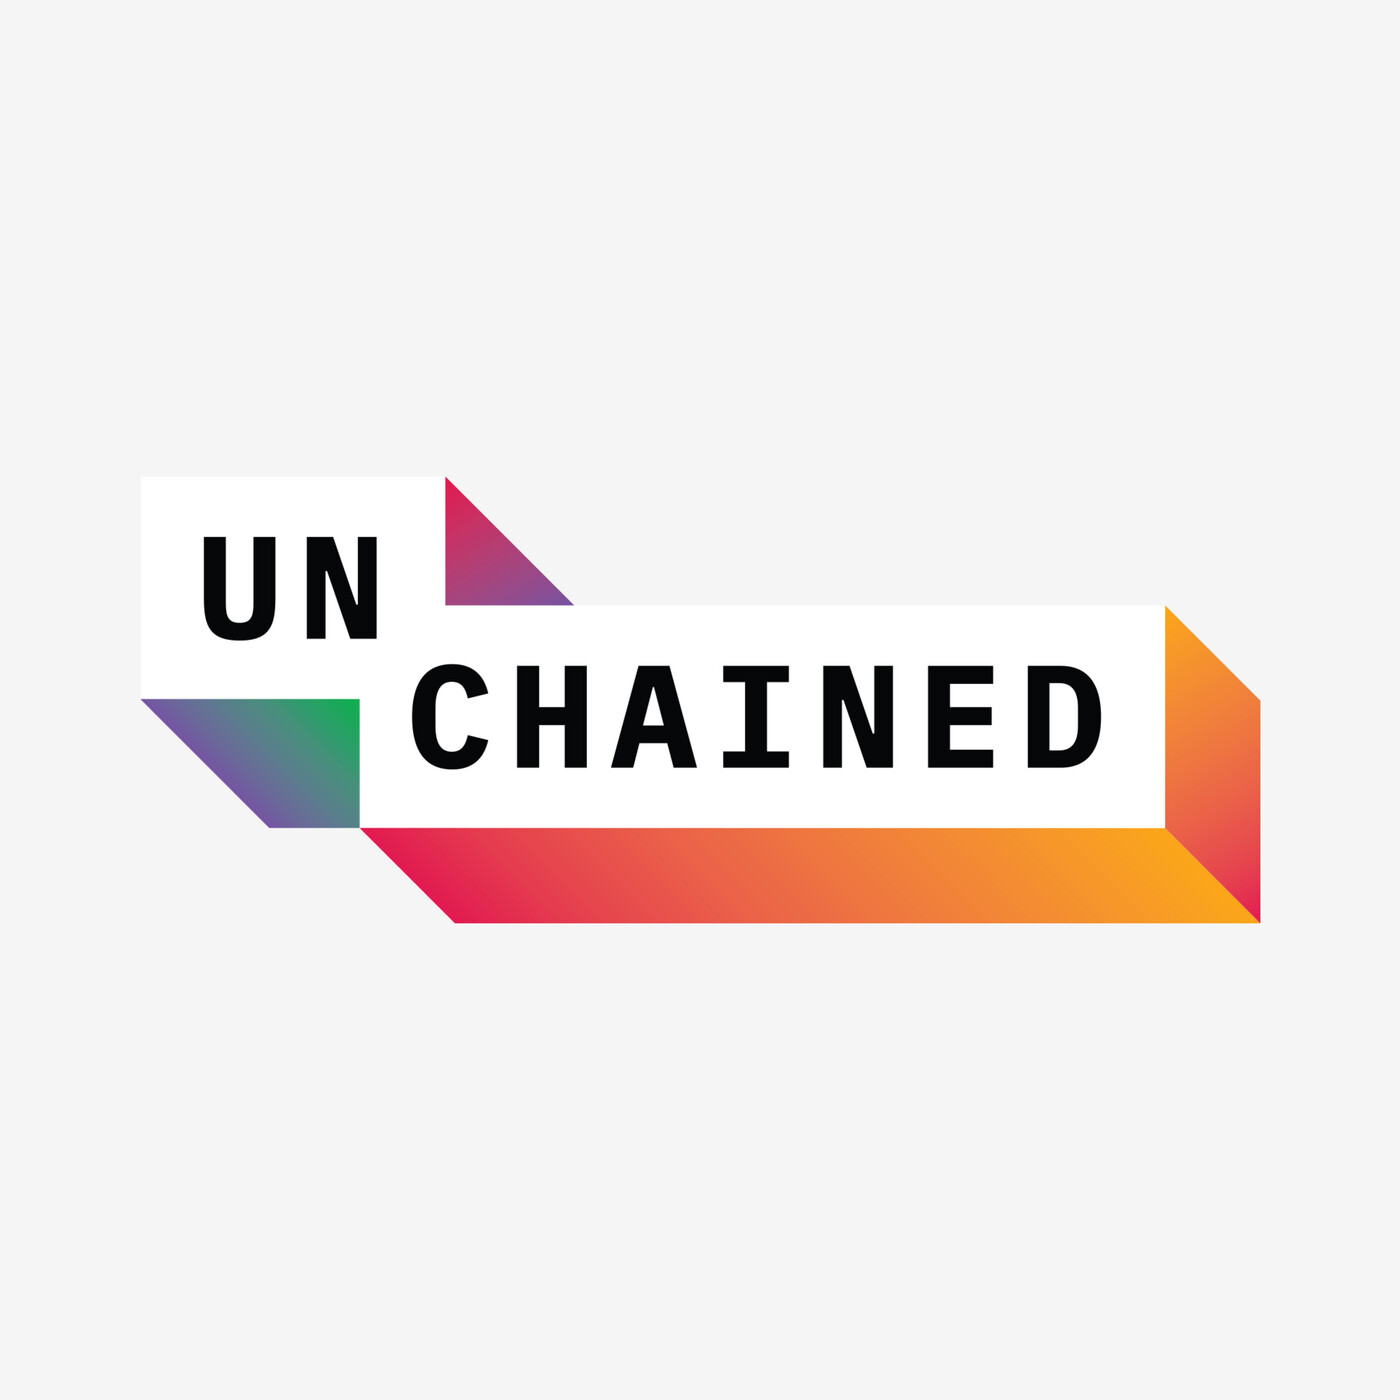 UNCHAINED: Arthur Hayes and Will Clemente on How This Bitcoin Halving Is Different